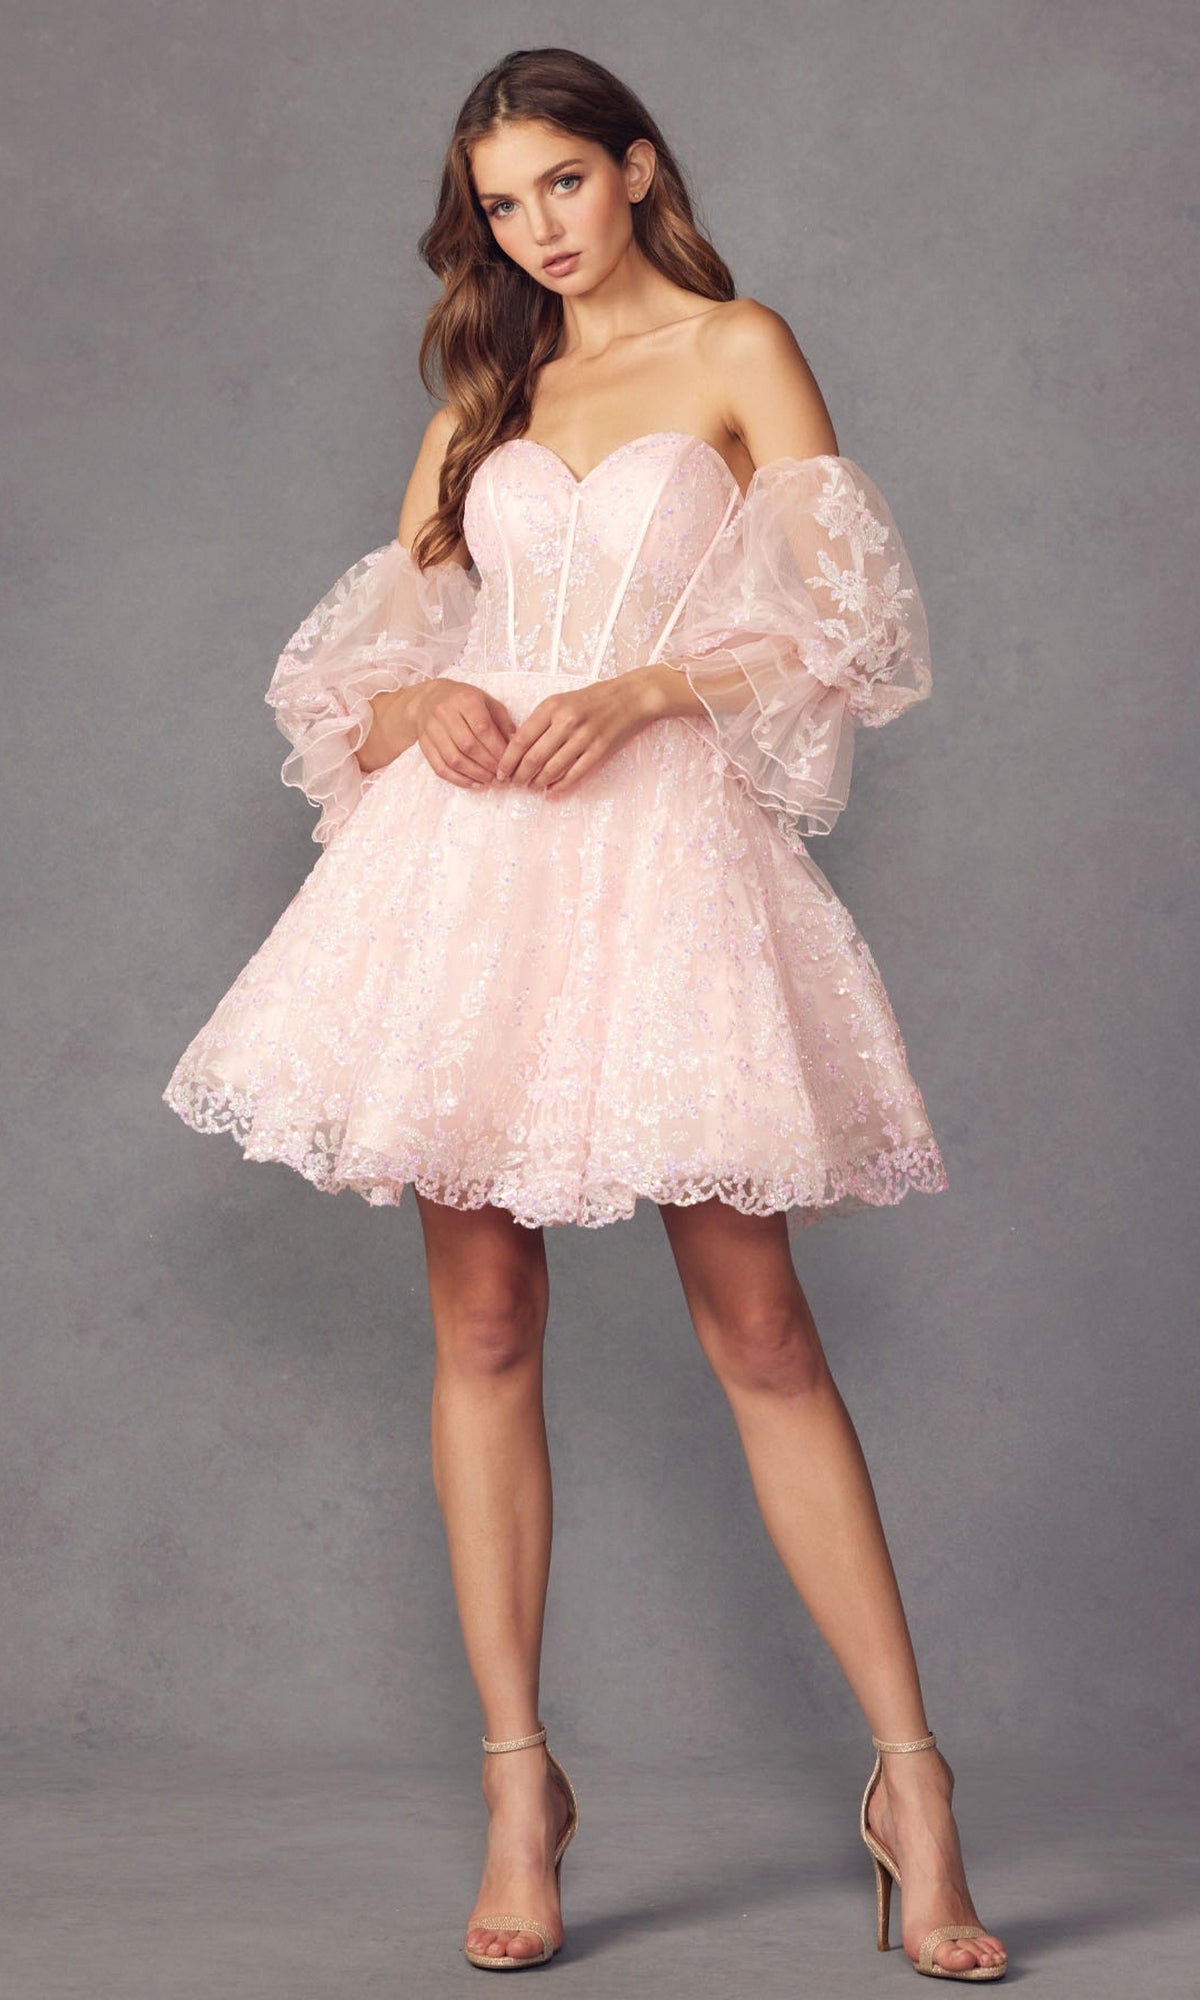 Short Strapless Prom Dress with Sleeves - PromGirl